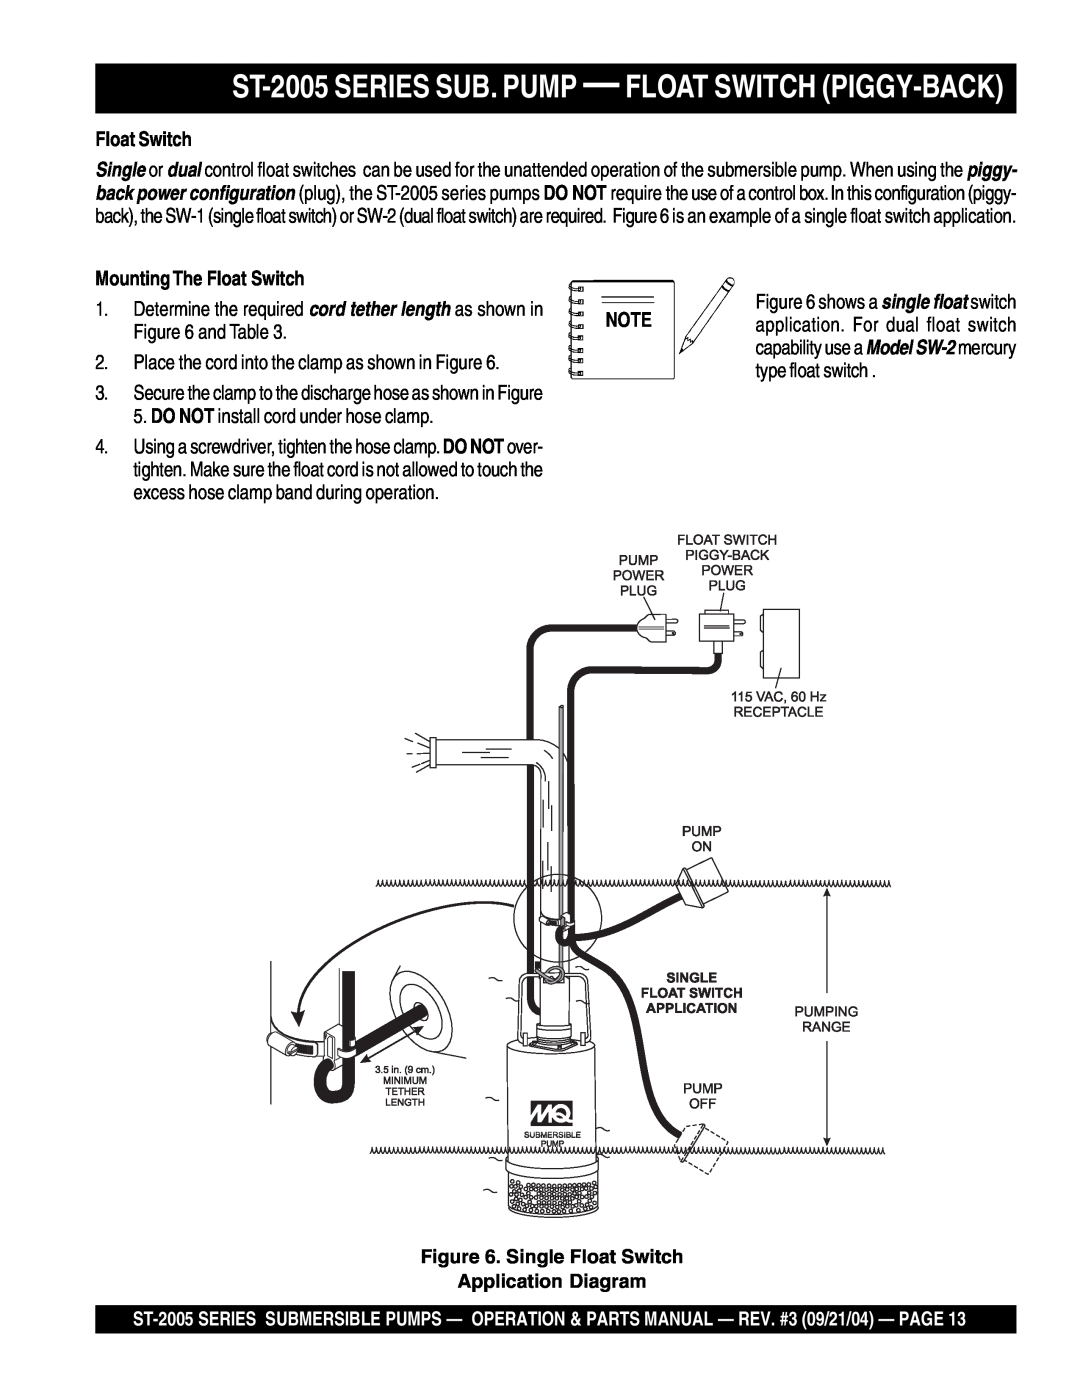 Multiquip manual ST-2005 SERIES SUB. PUMP - FLOAT SWITCH PIGGY-BACK, Mounting The Float Switch 